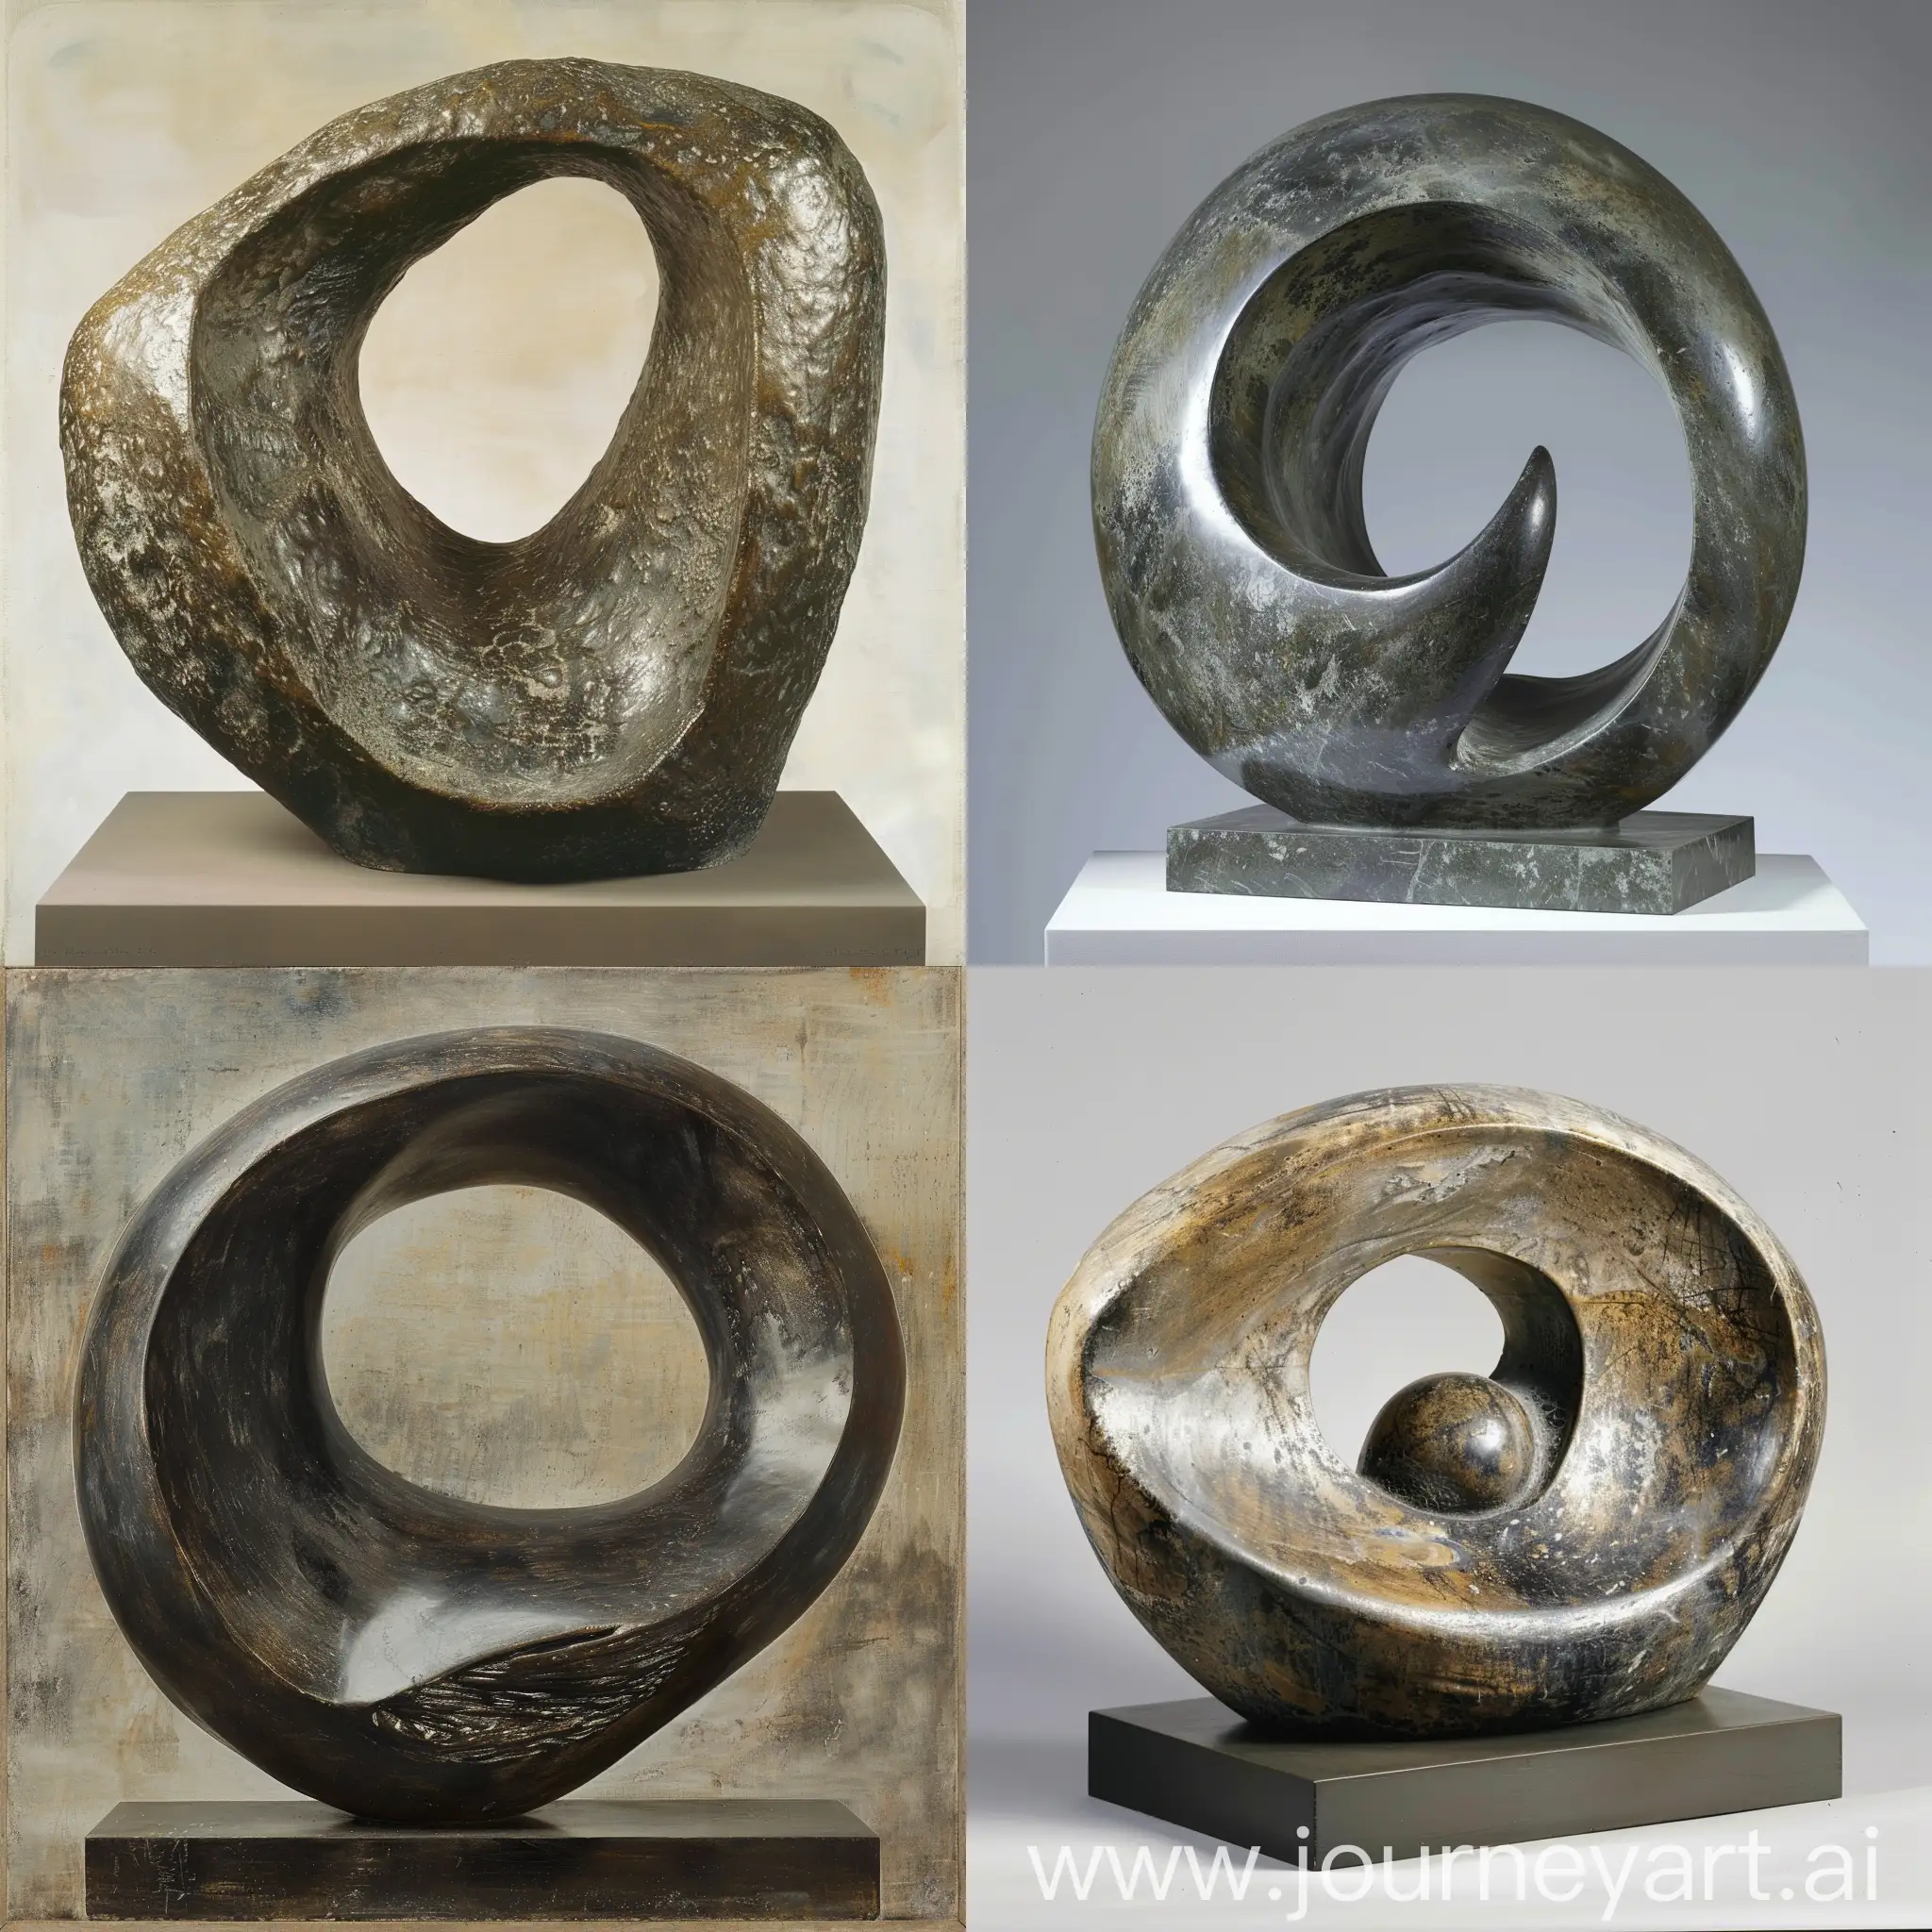 Sculptural-Exploration-by-Henry-Moore-Abstract-Form-in-Harmonious-Balance